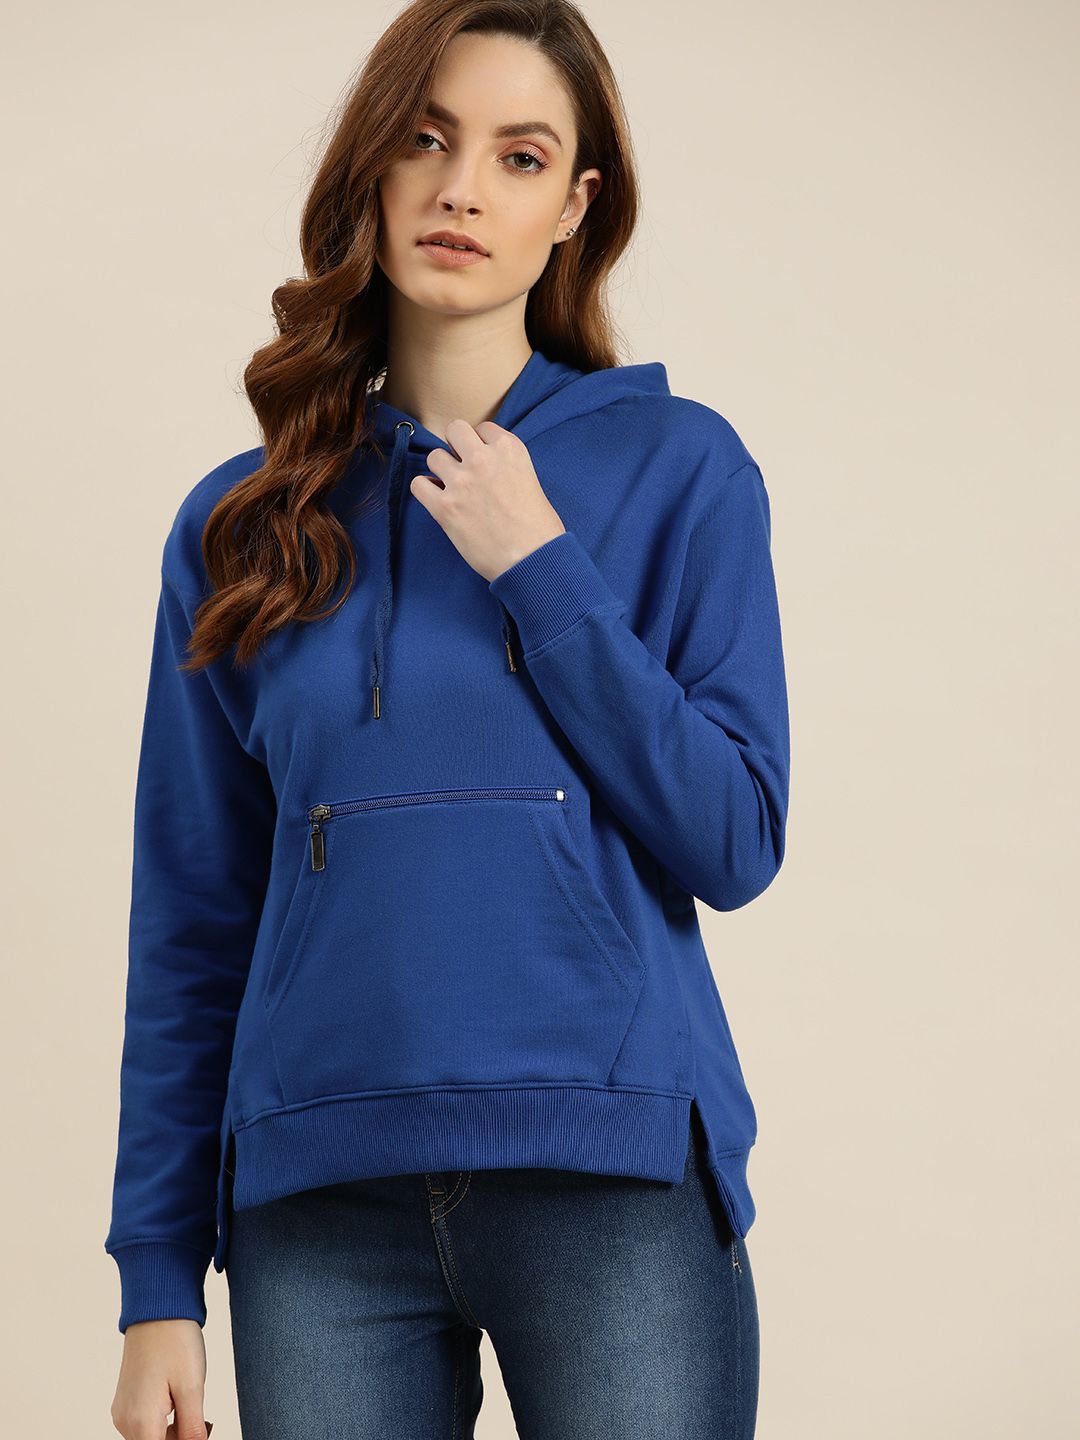 ether Women Navy Blue Solid Hooded Sweatshirt Price in India